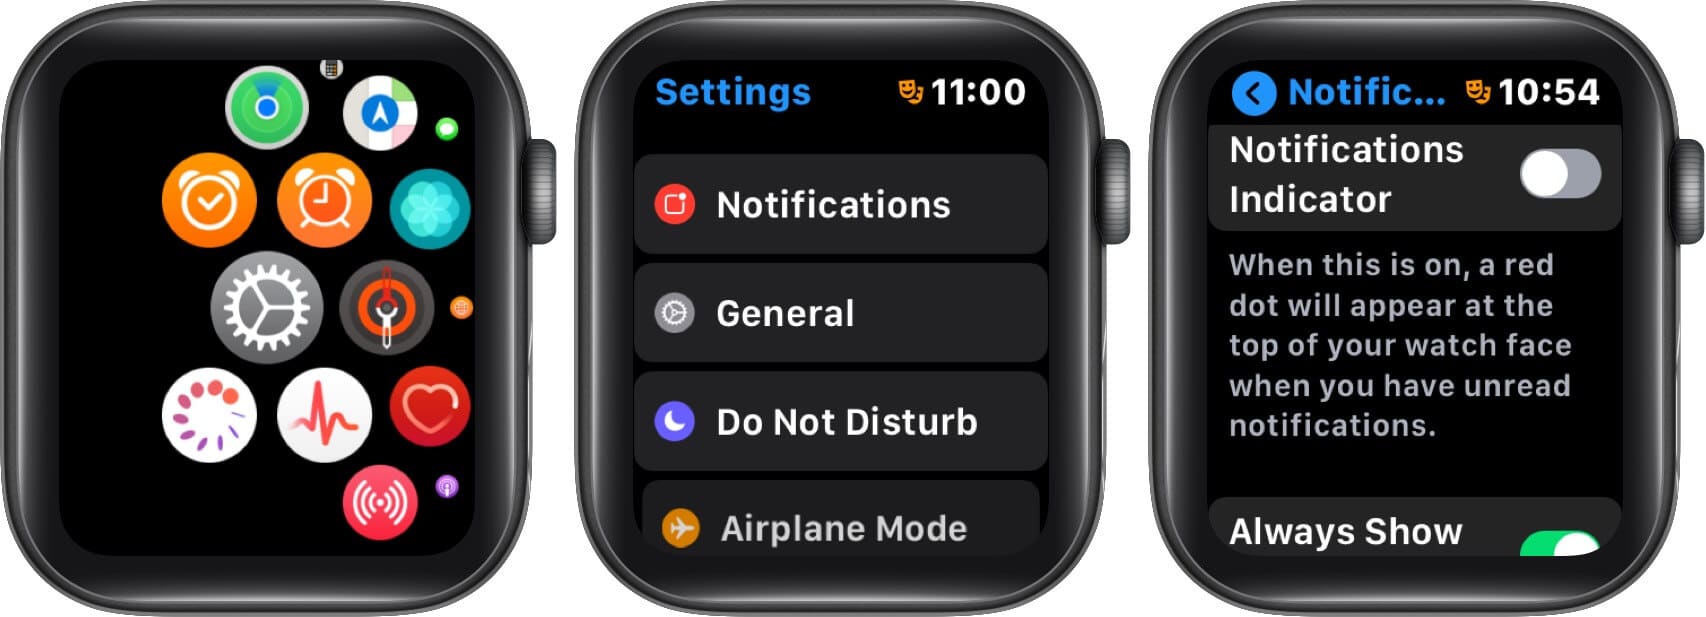 turn off notifications to remove red dot on apple watch